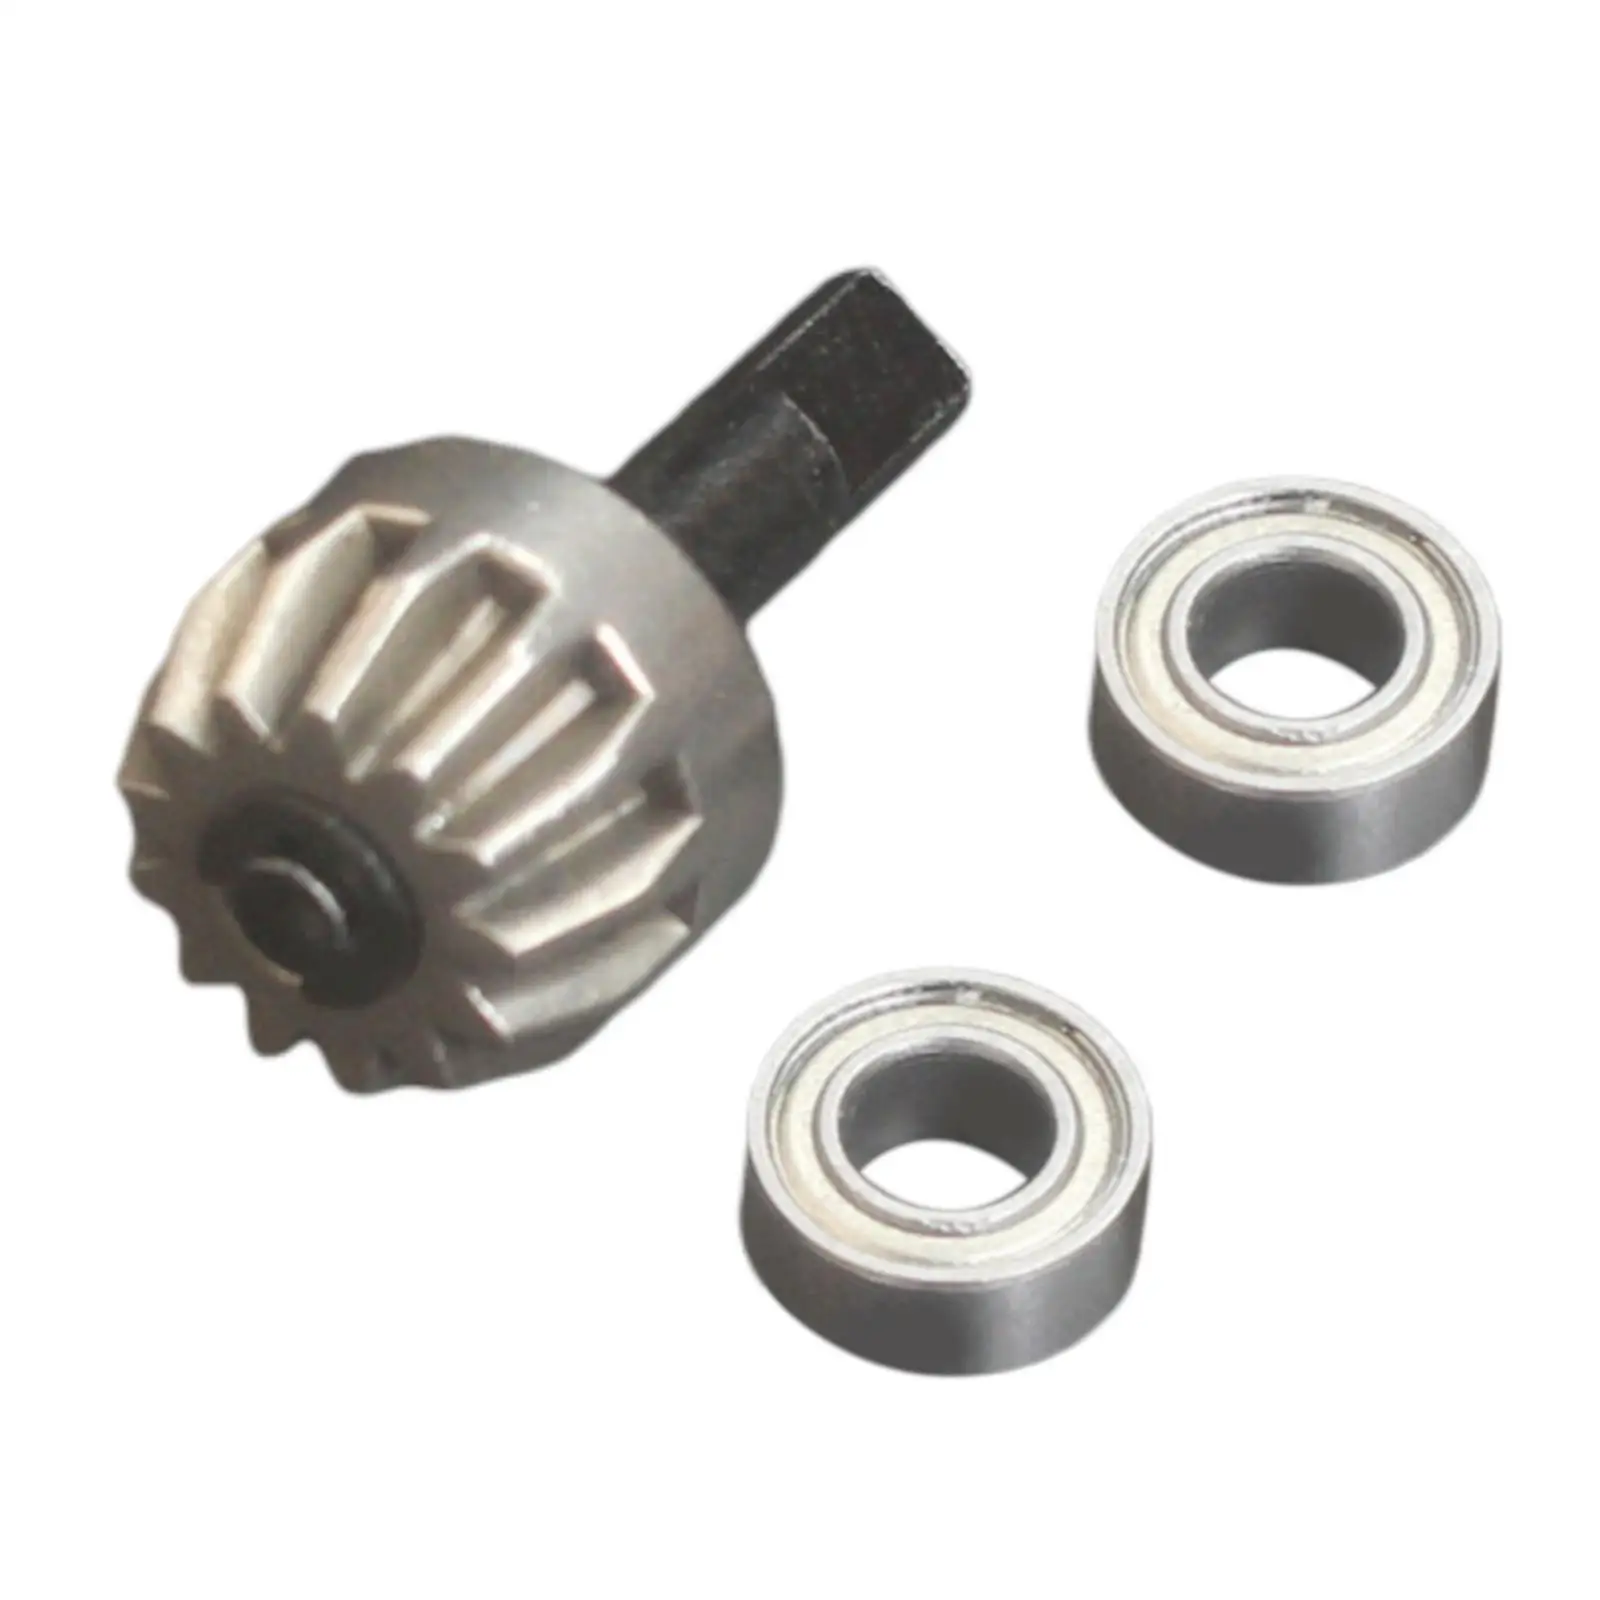 3/Set 13T Diff Gear +Bearings for HSP 94122 94123 94111 1:10 RC Crawler Accessory